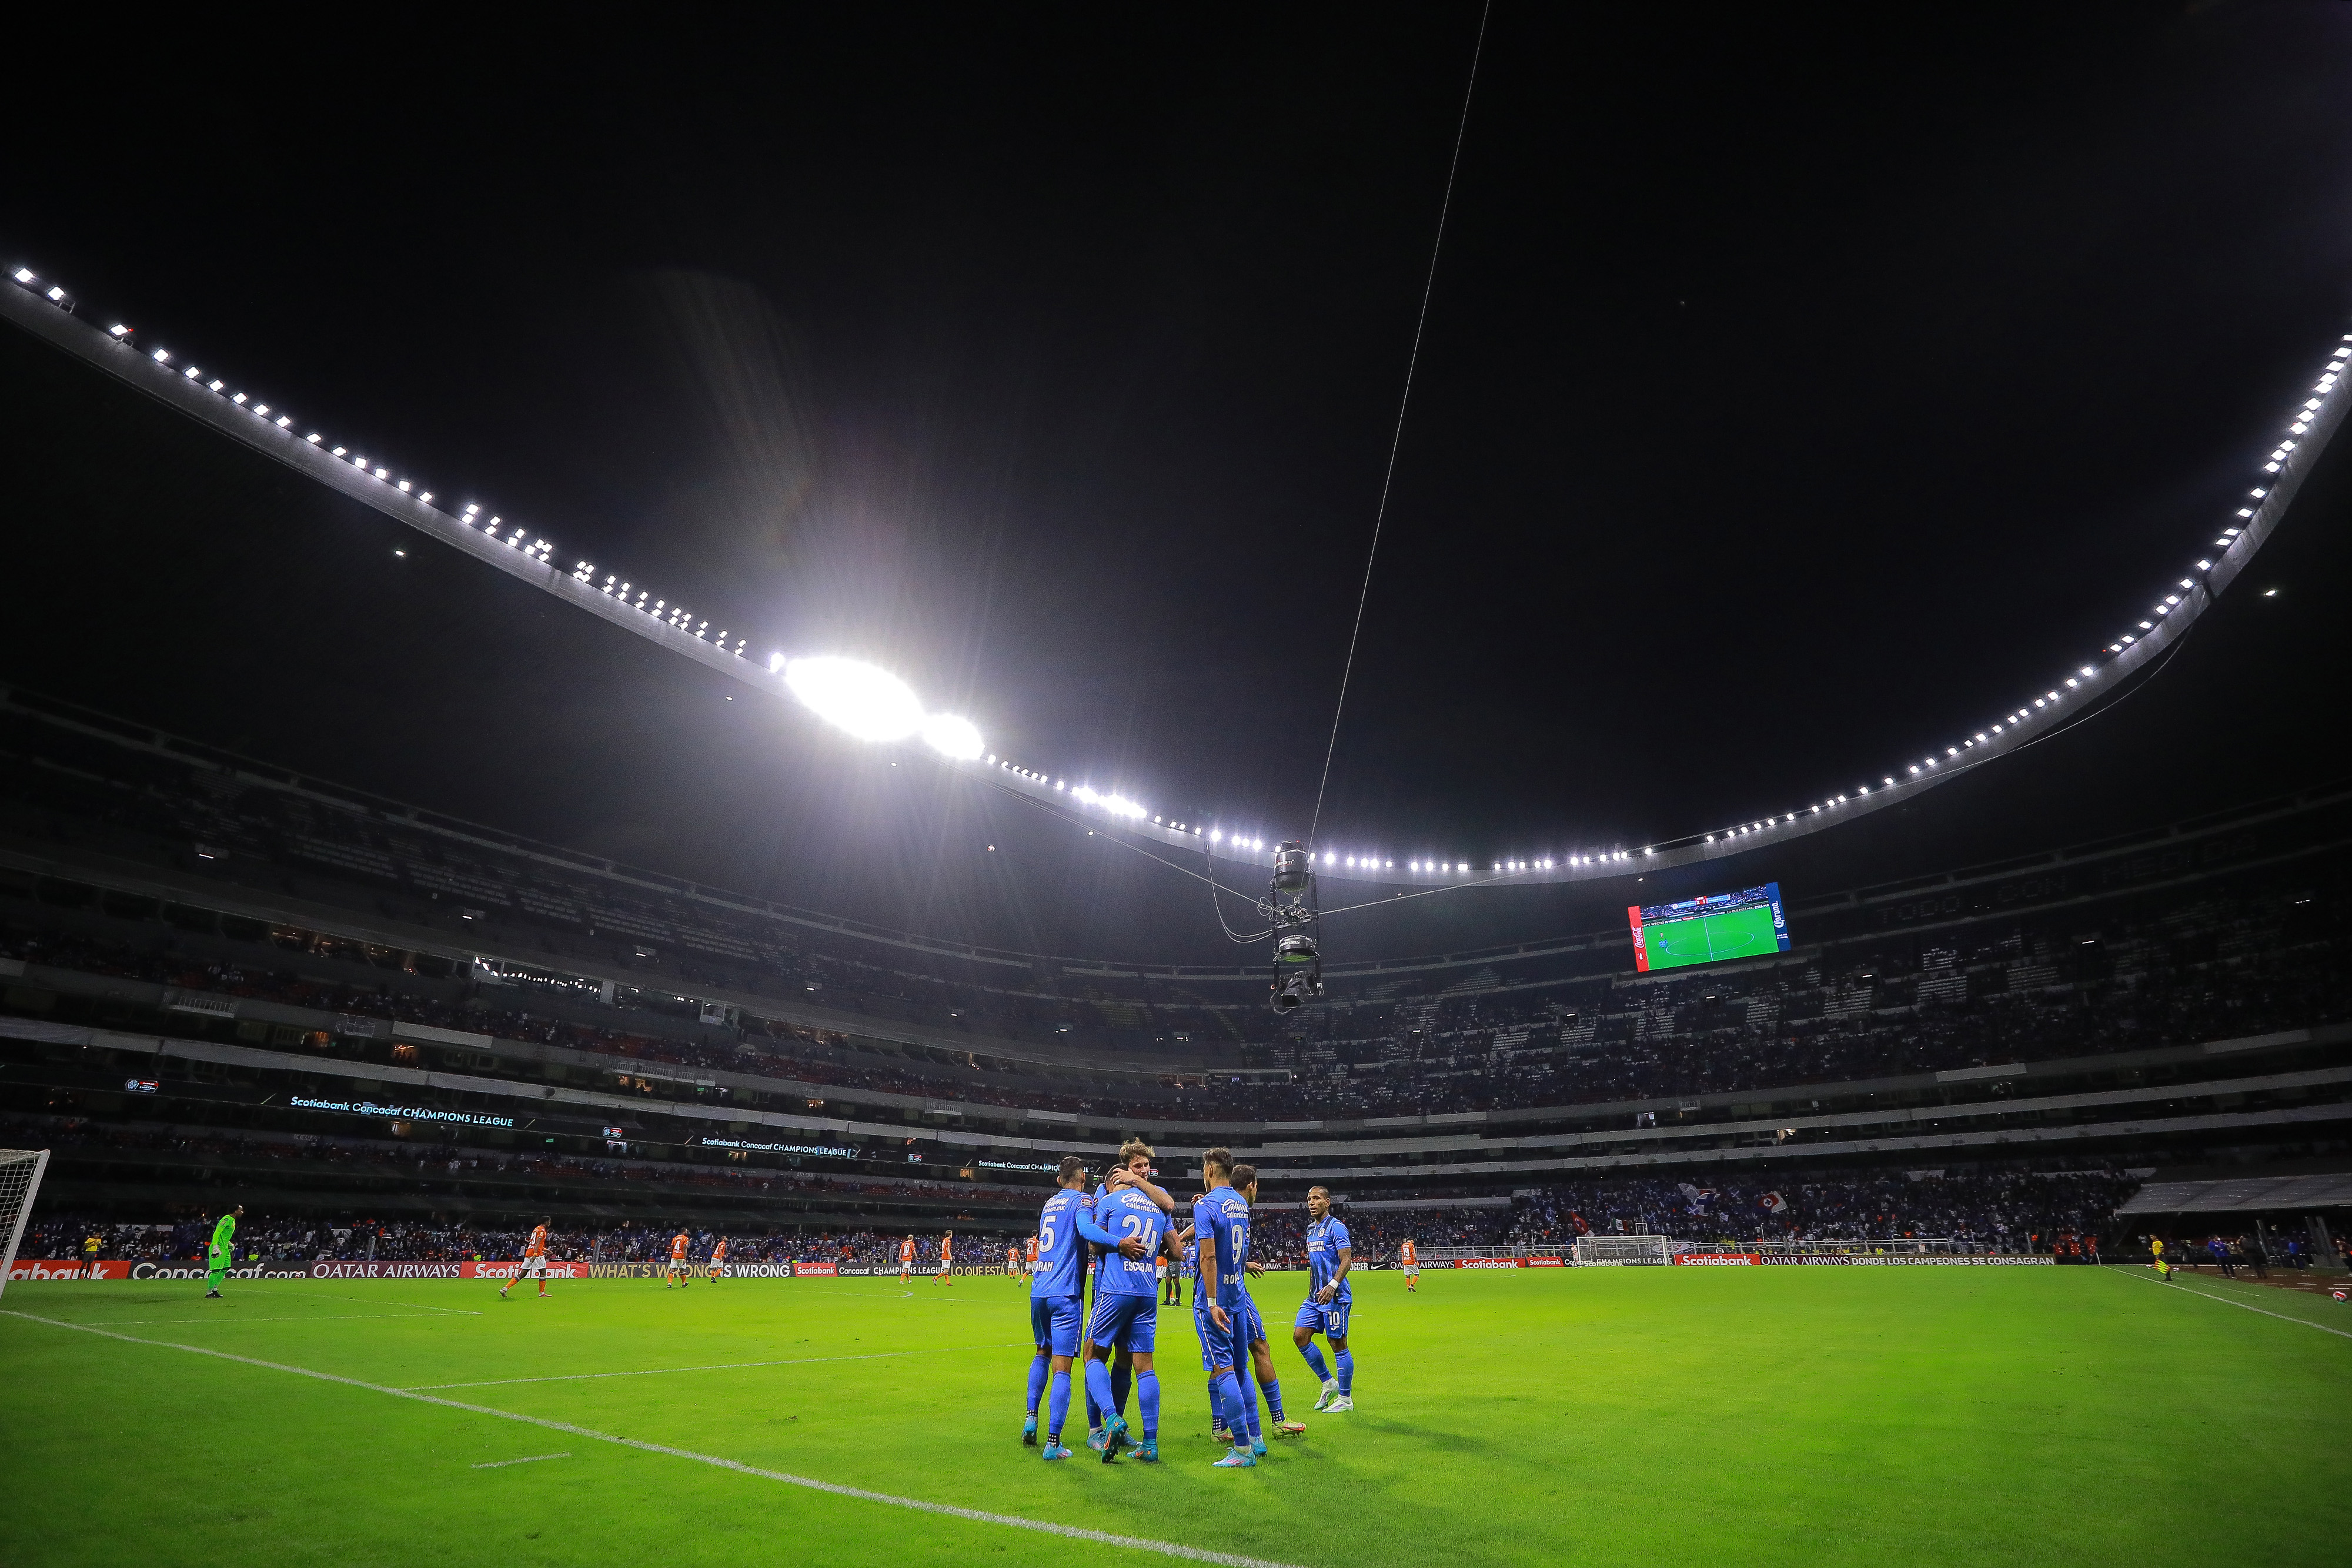 Juan Escobar of Cruz Azul celebrates after scoring the third scored goal of his team with teammates during the round of 16 2nd leg match between Cruz Azul and Forge FC as part of the Concacaf Champions League 2022 at Azteca Stadium on February 24, 2022 in Mexico City, Mexico.